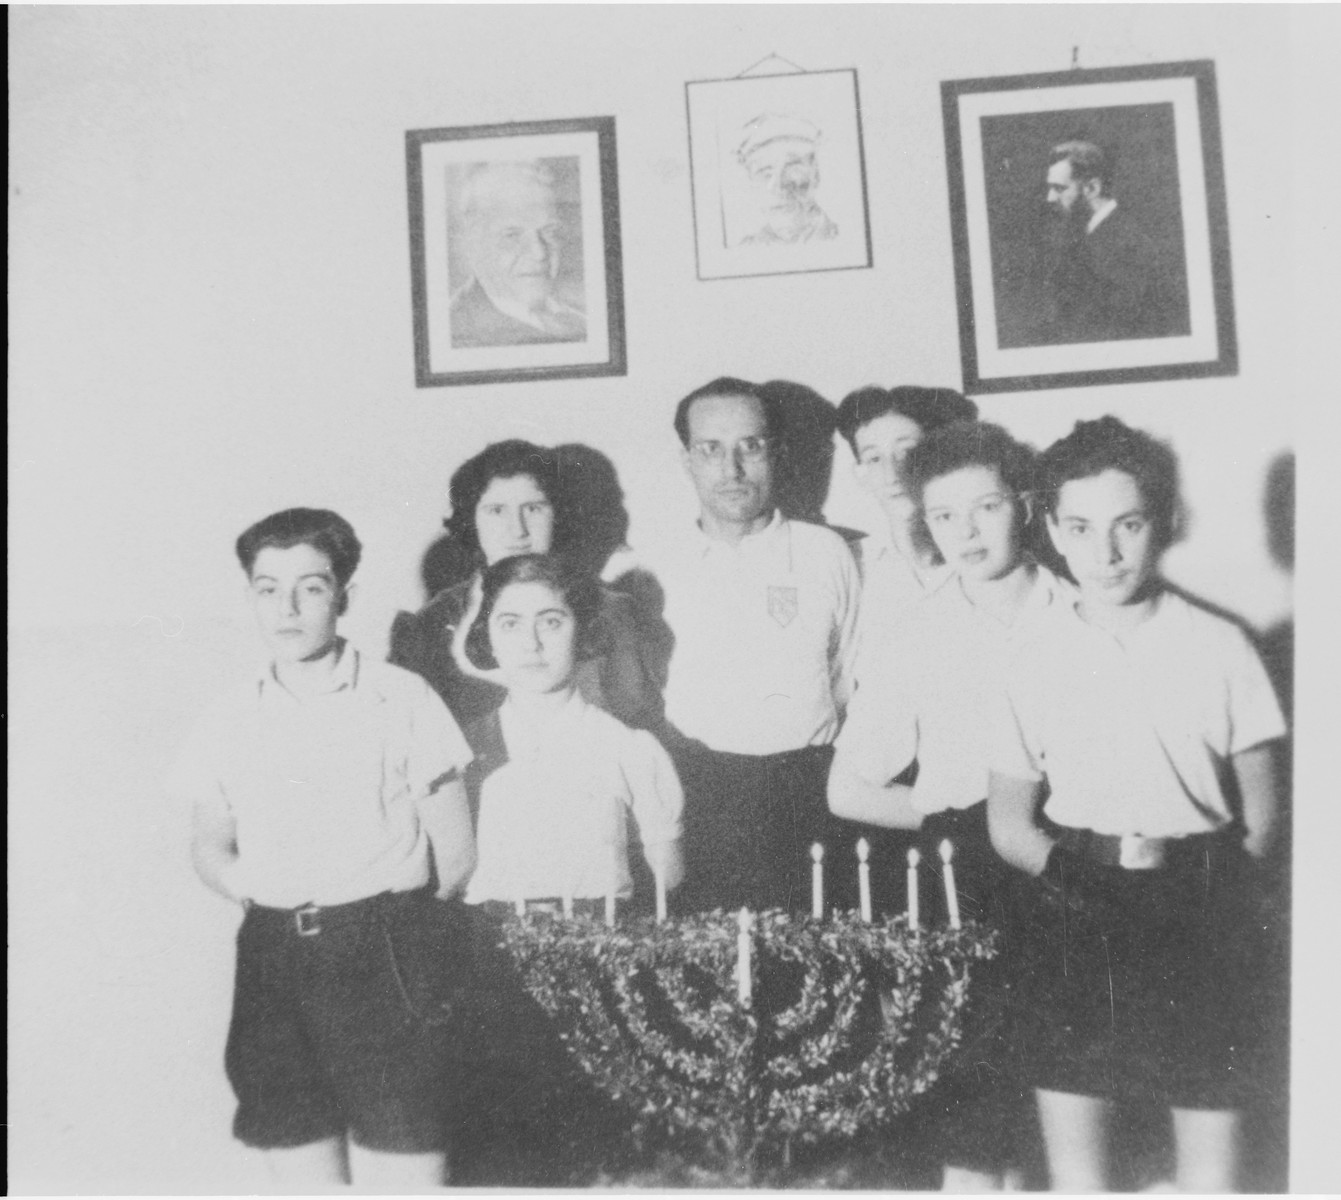 Jizchak Schwersenz (center) poses with some of his students during a Hanukkah celebration at the Youth Aliyah school in Berlin.